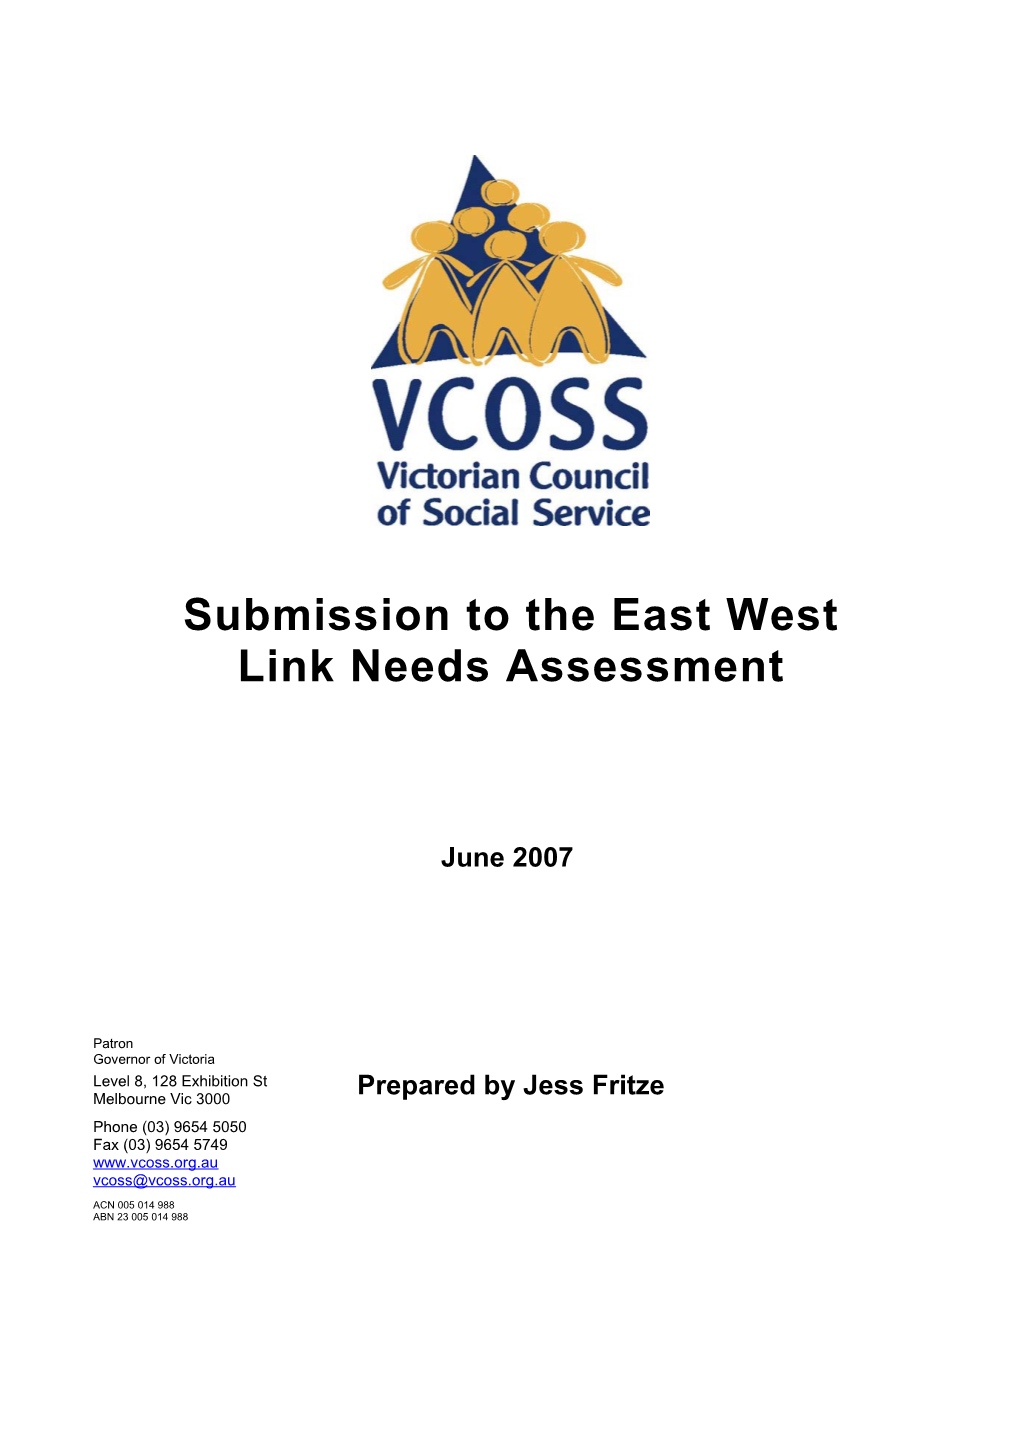 East West Link Needs Assessment Submission